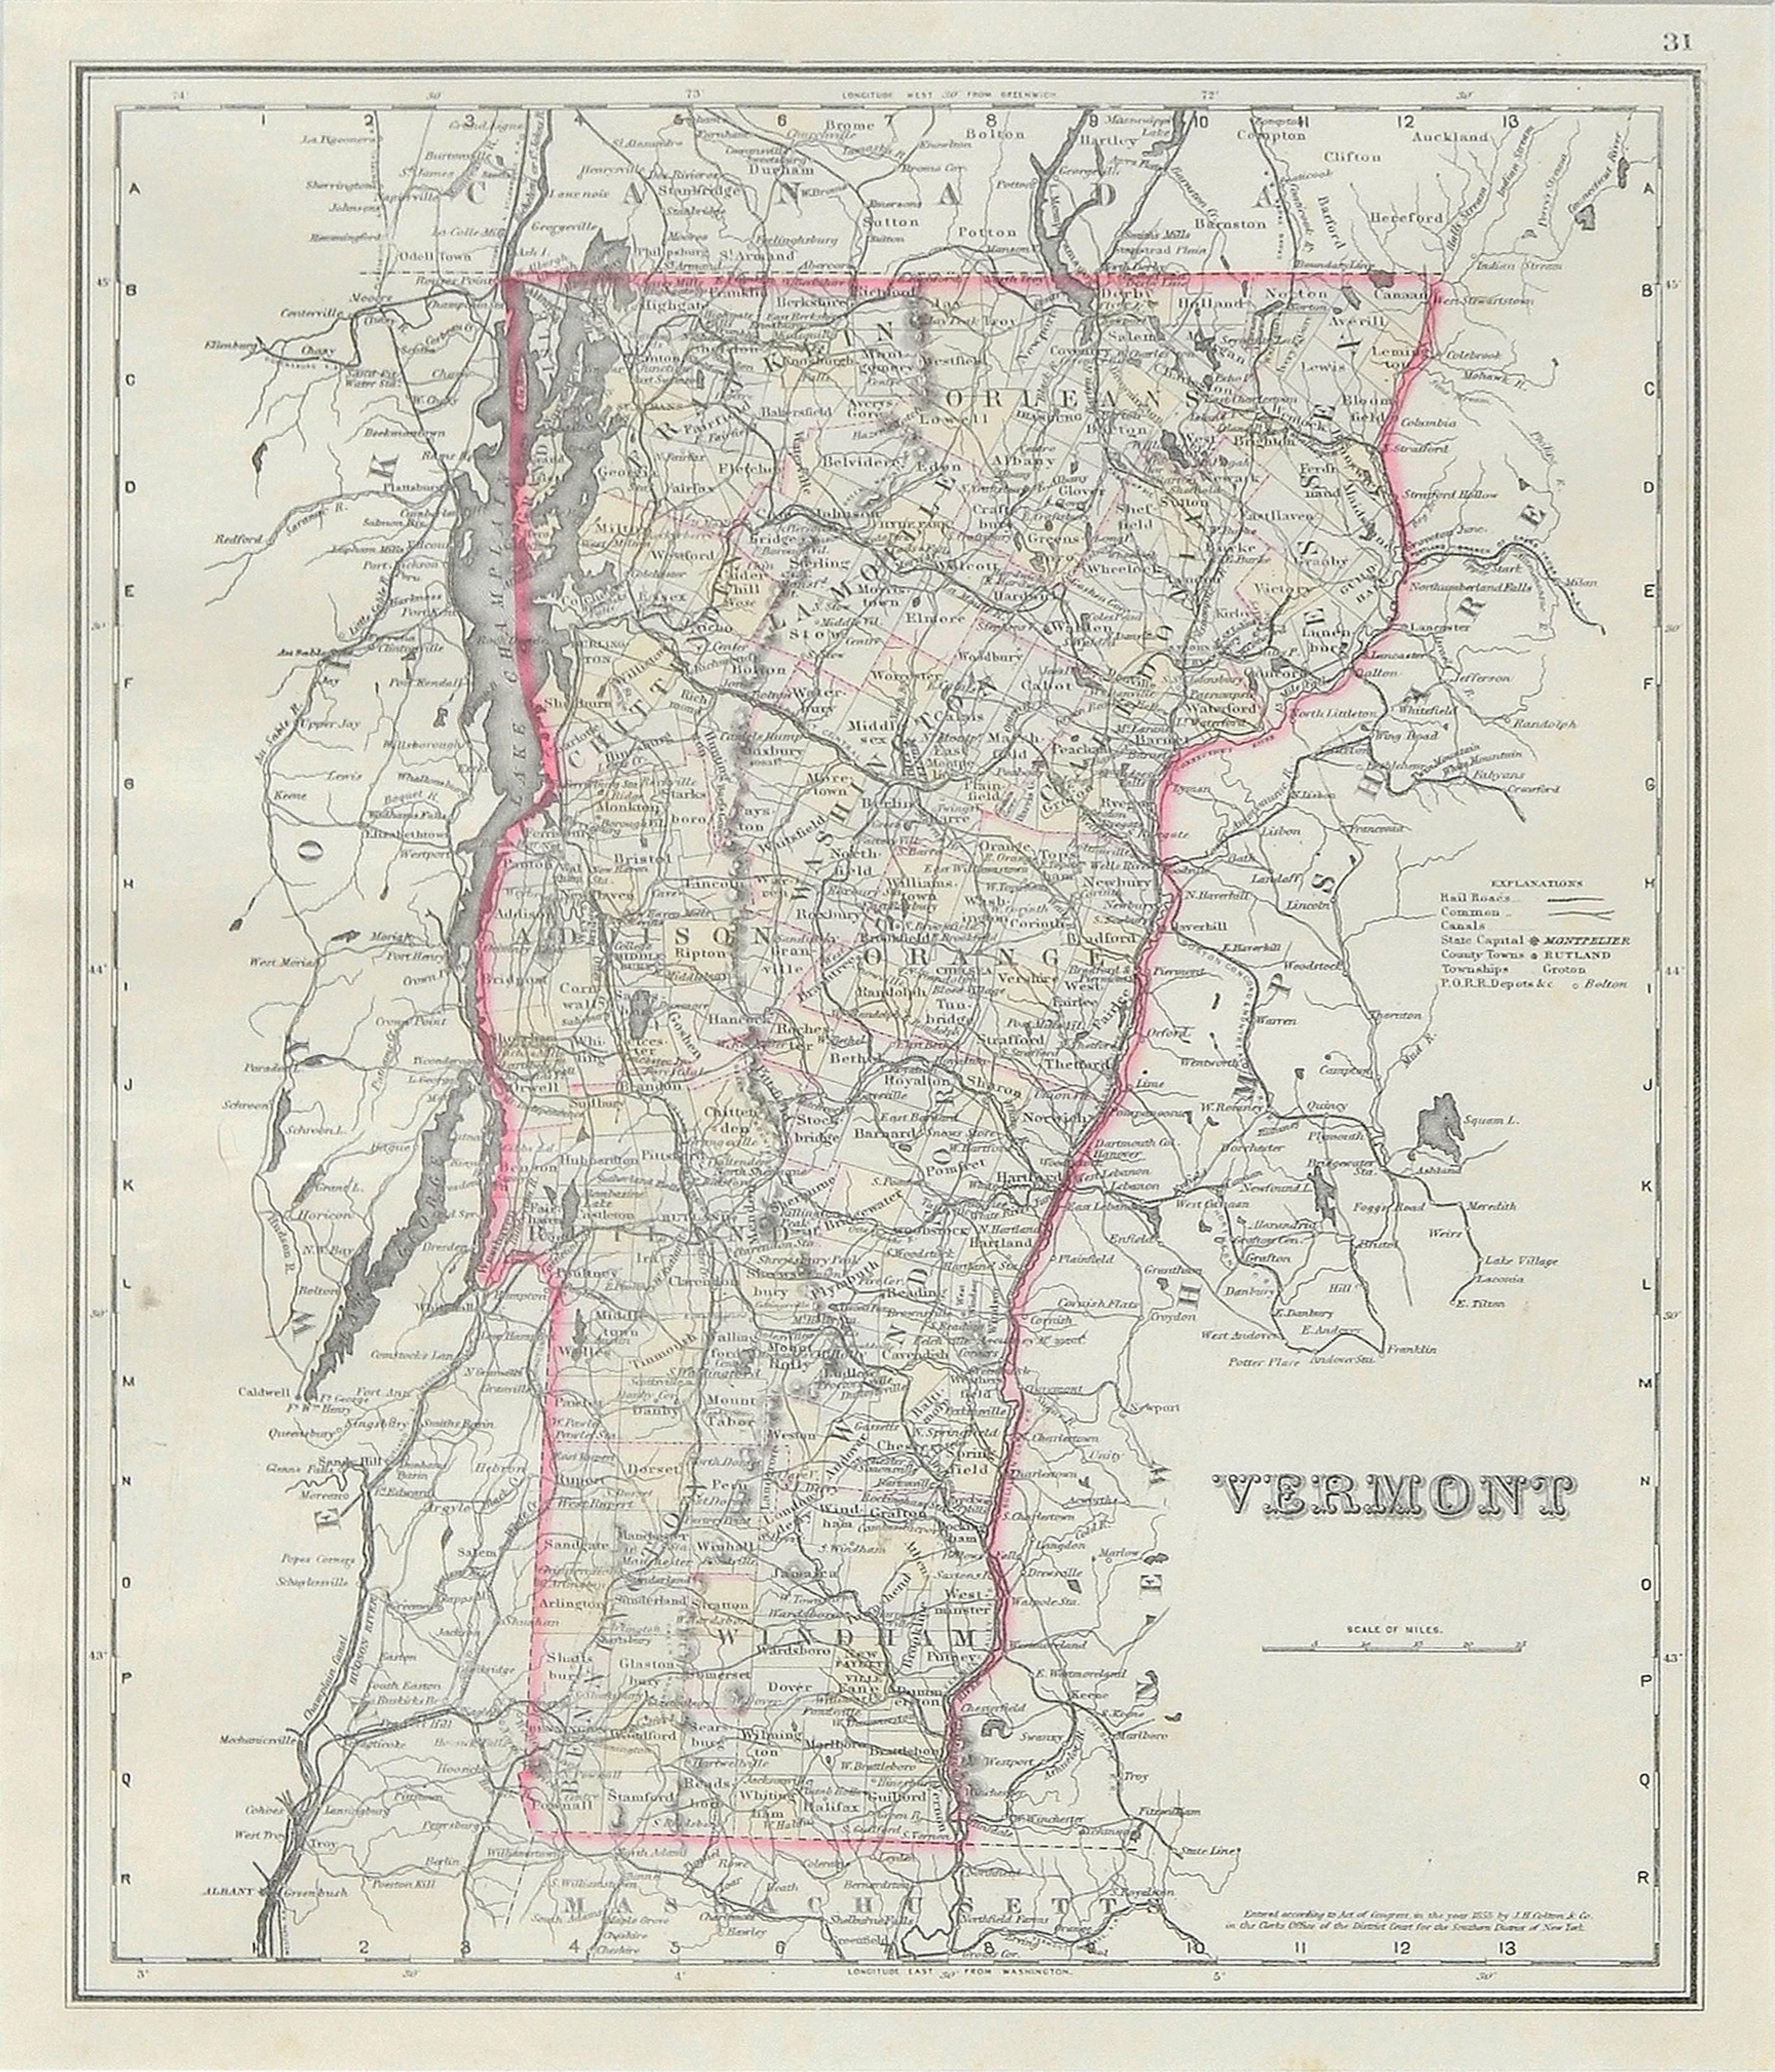 Antique Map of Vermont - Print by J.H. Colton & Company